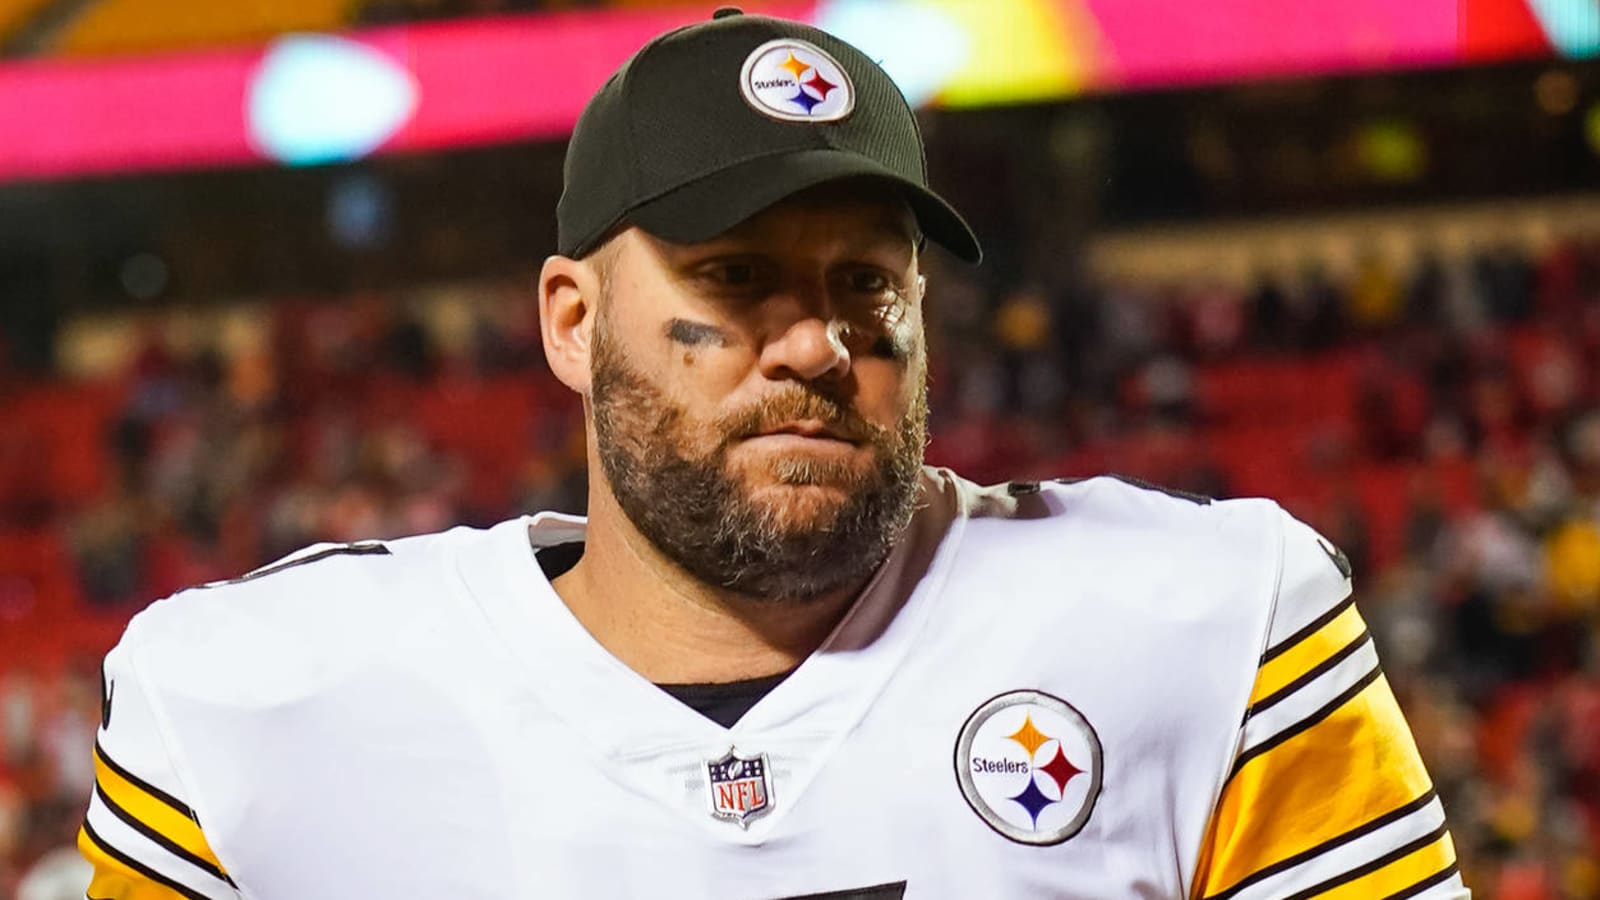 AB weighs in on Ben Roethlisberger's possible retirement